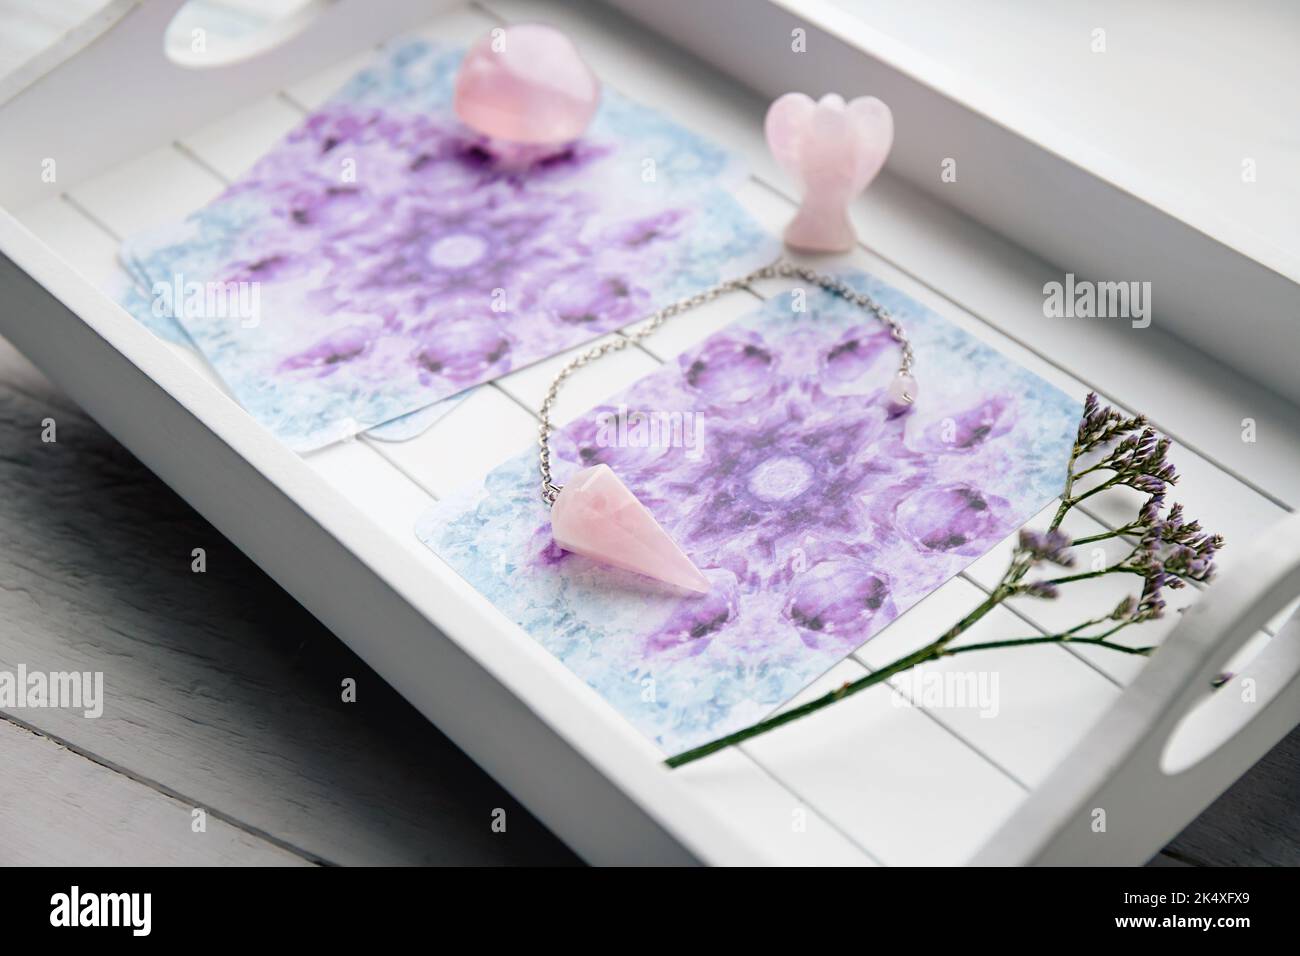 Deck with homemade Angel cards on white tray at home table, surrounded with semi precious stones rose quartz crystals and angel shape figurine. Stock Photo